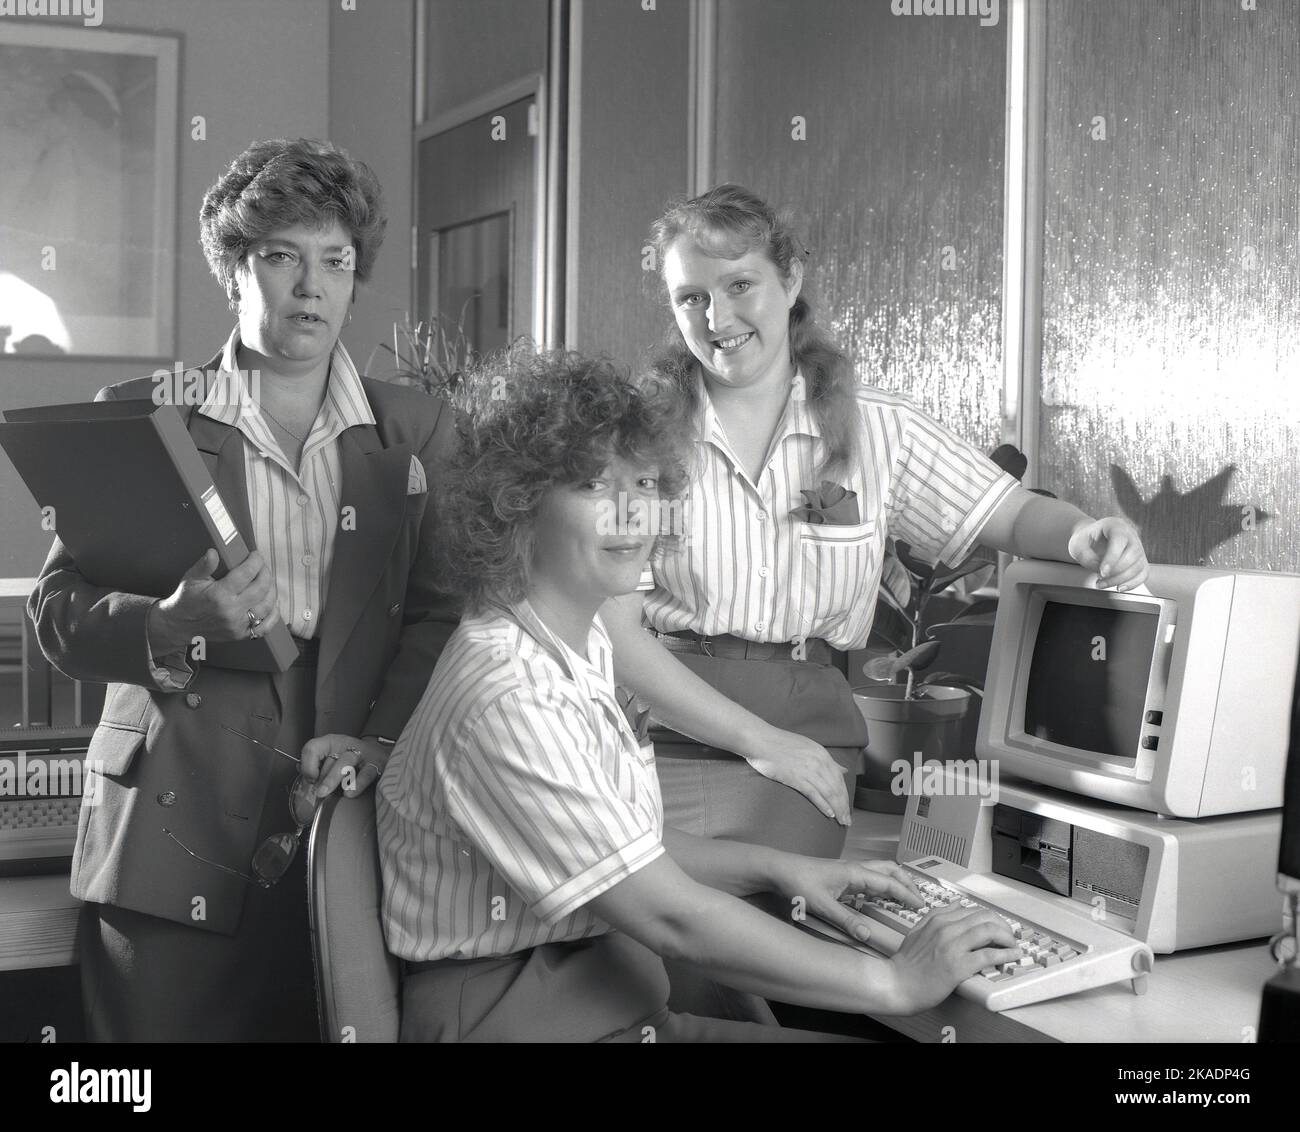 1989, historical, three office female staff by a computer of the era, England, UK. Manager in jacket behind, with folder, labeled 'House Rules'. One of the women is sitting at a keyboard infront of an IBM personal computer of the era, consisting of a separate display monitor and computer, with floppy disk capacity. Stock Photo